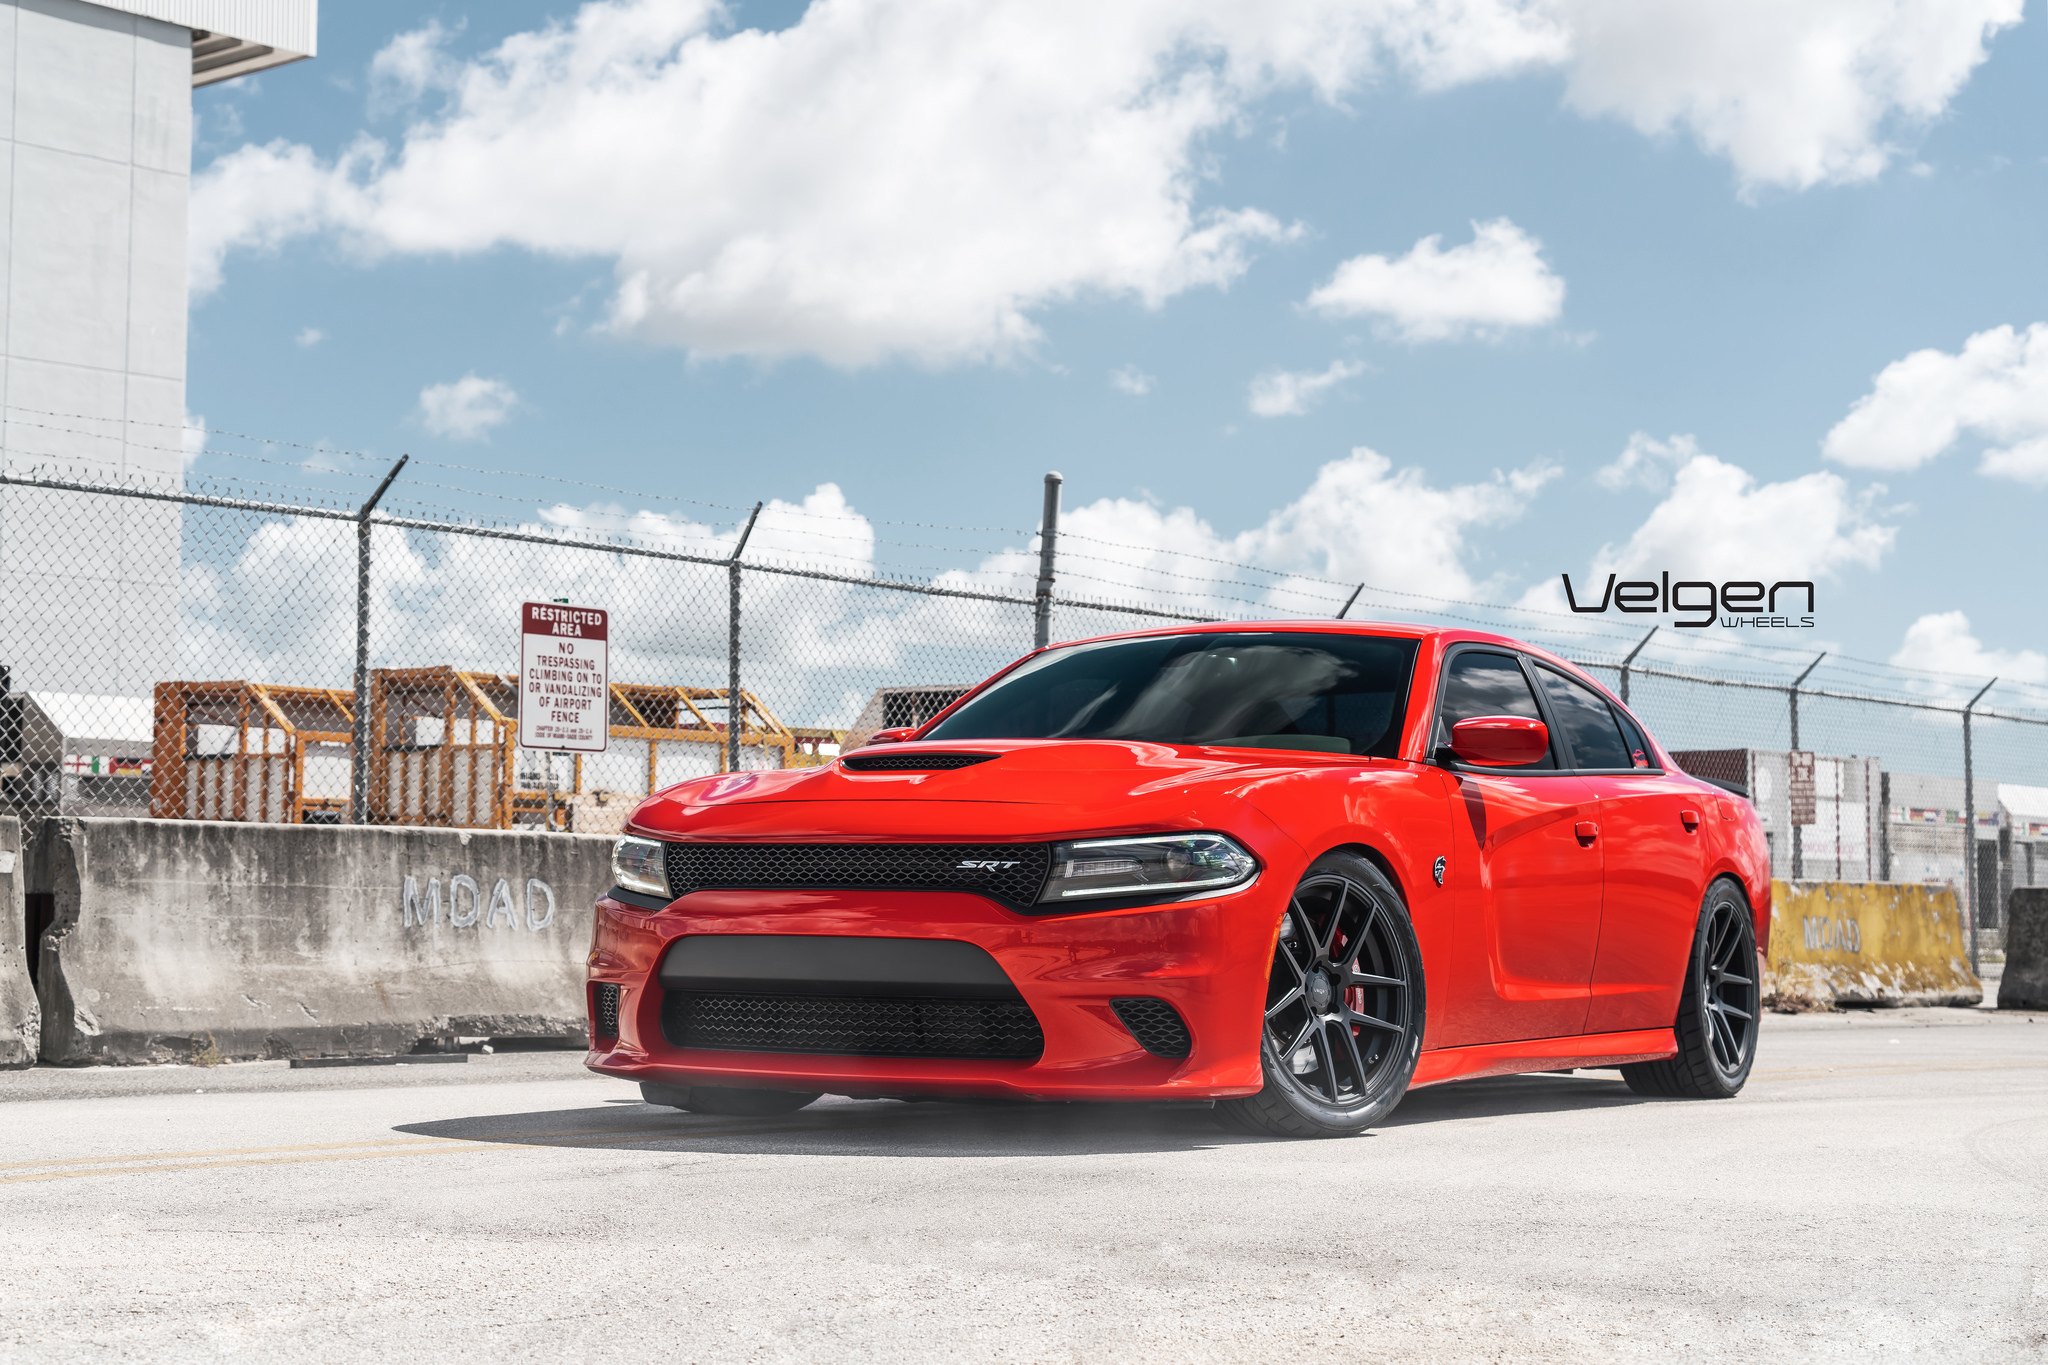 Blacked Out Mesh Grille on Red Dodge Charger SRT - Photo by Velgen Wheels